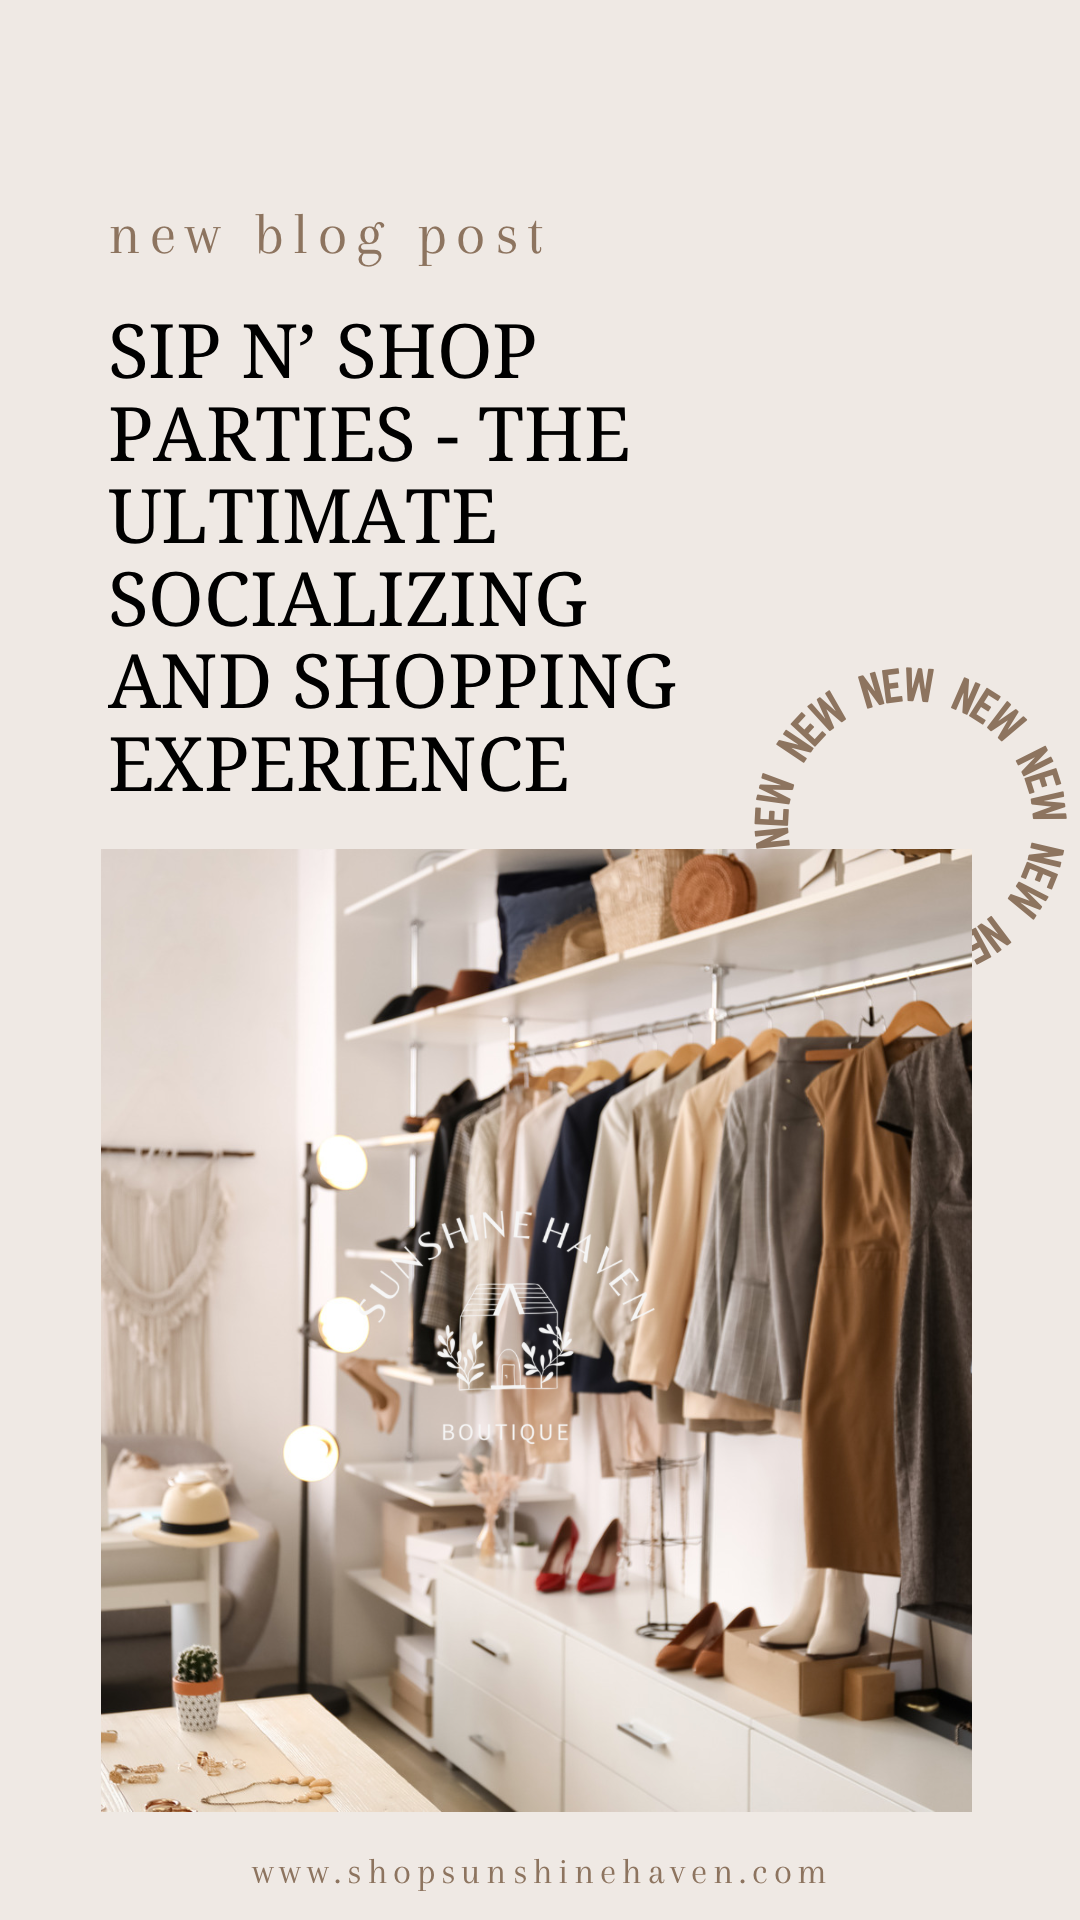 Sip n’ Shop Parties - The Ultimate Socializing and Shopping Experience